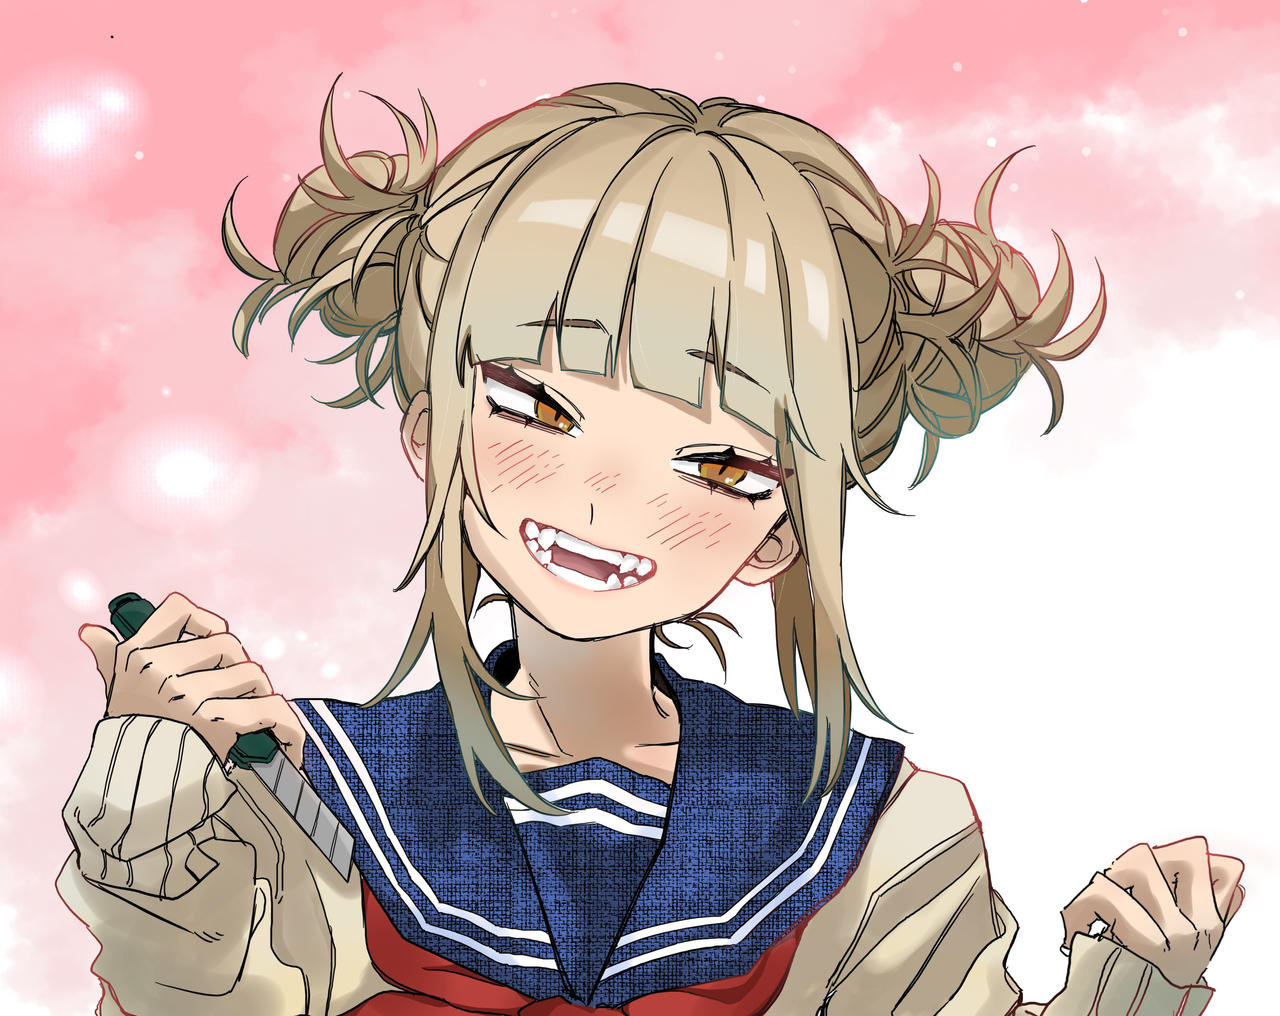 Toga Himiko coloring by duongthao799 on DeviantArt